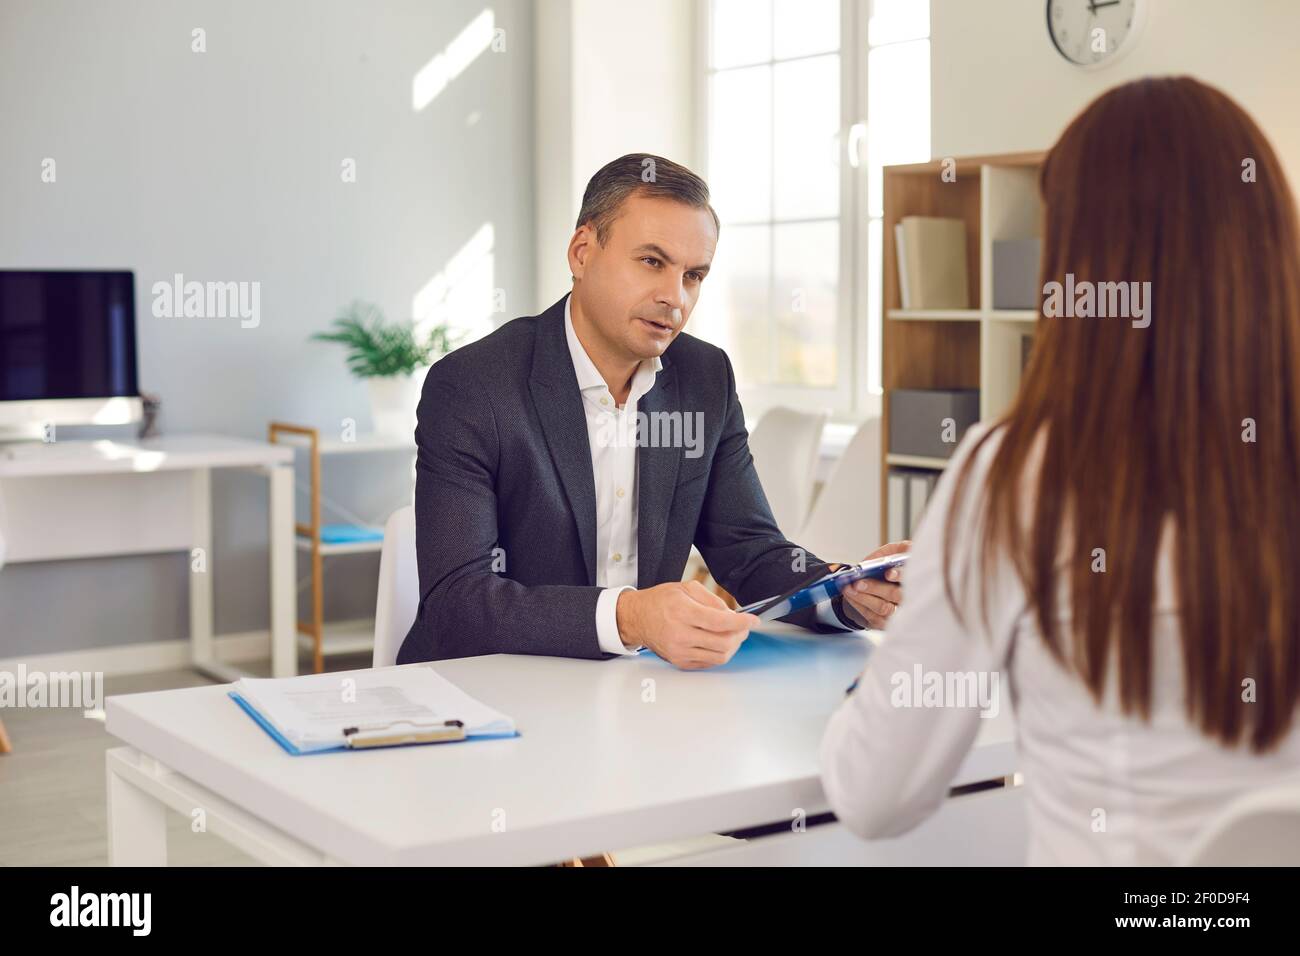 HR manager interviewing job candidate asking her questions concerning her work experience Stock Photo